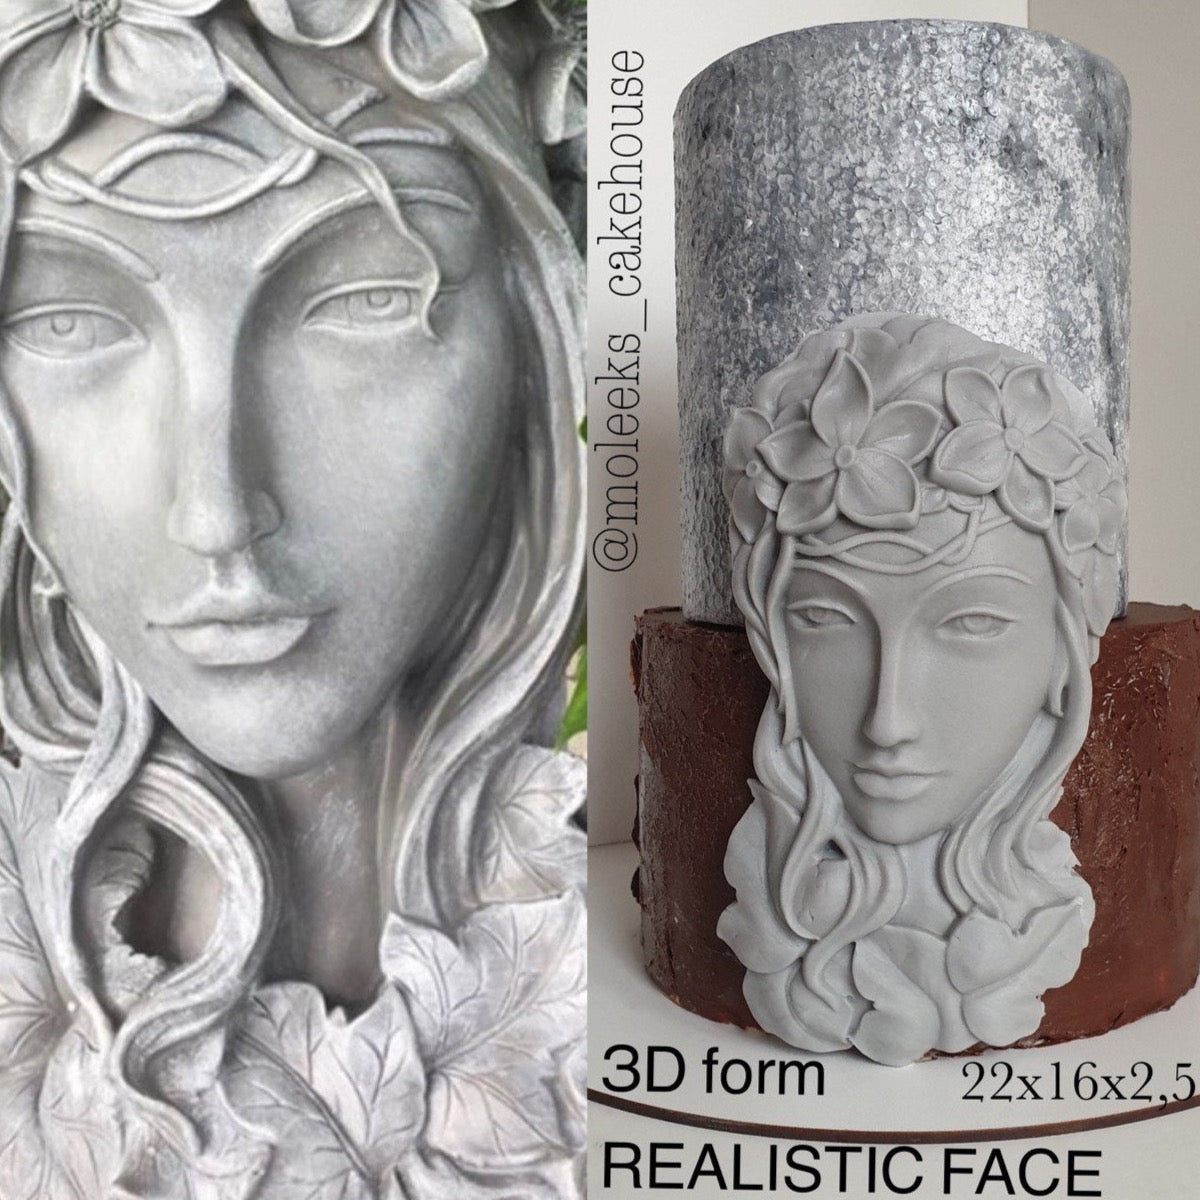 REALISTIC FACE Mold - figures